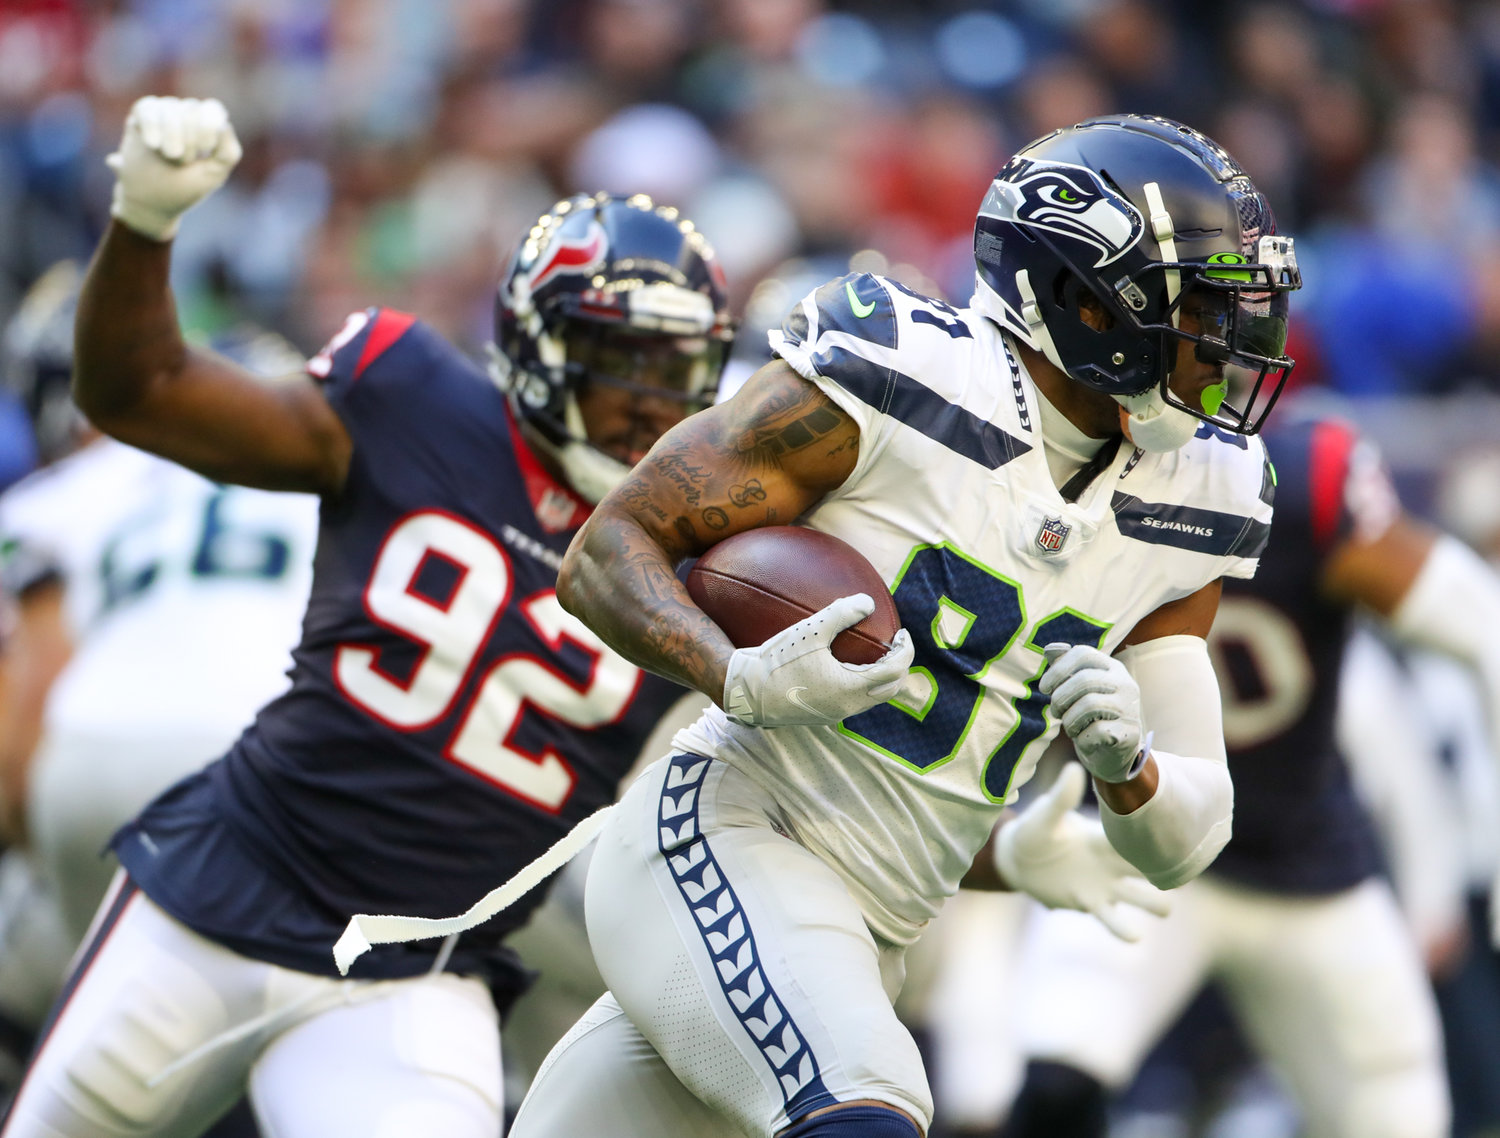 Seattle Seahawks tight end Gerald Everett (81) carries the ball during the second half of an NFL game between the Seahawks and the Texans on December 12, 2021 in Houston, Texas.